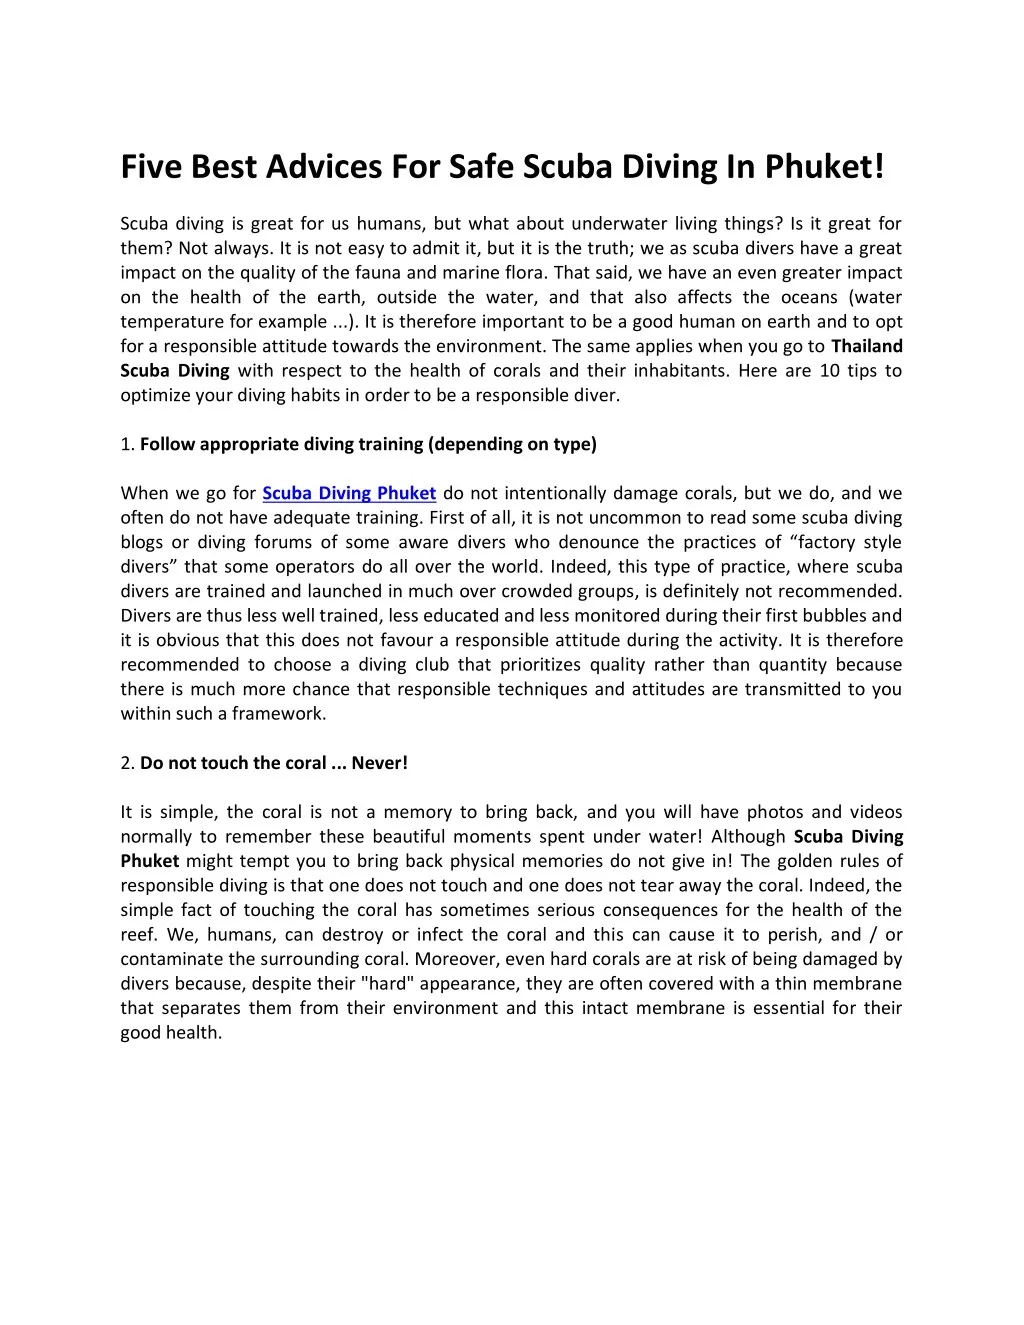 five best advices for safe scuba diving in phuket n.